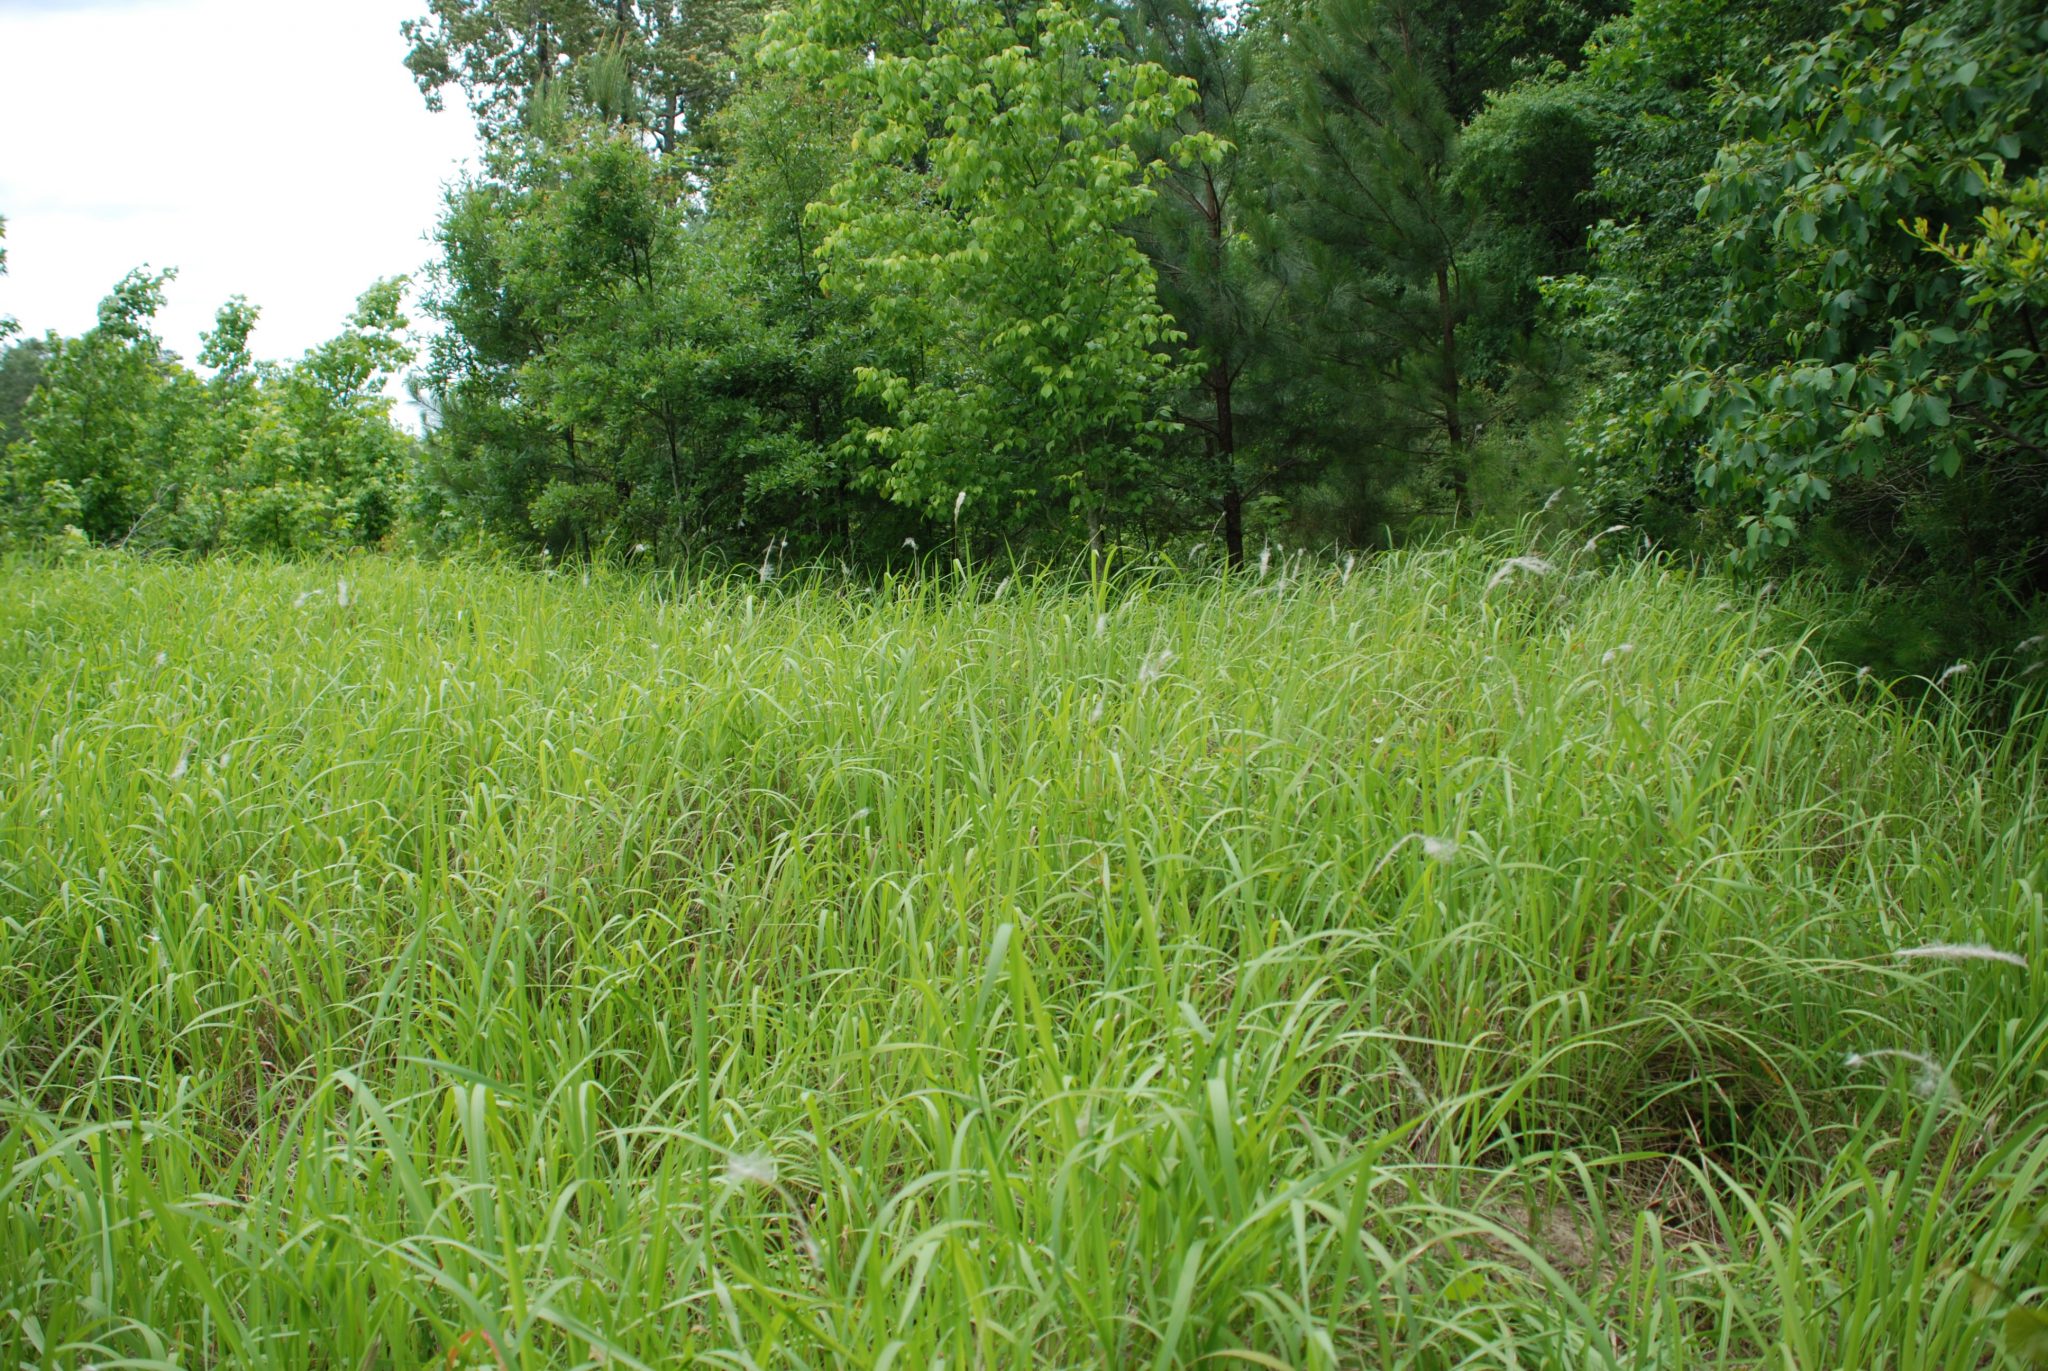 Figure 2. Cogongrass infestation showing the typical yellowish green color of the leaves.